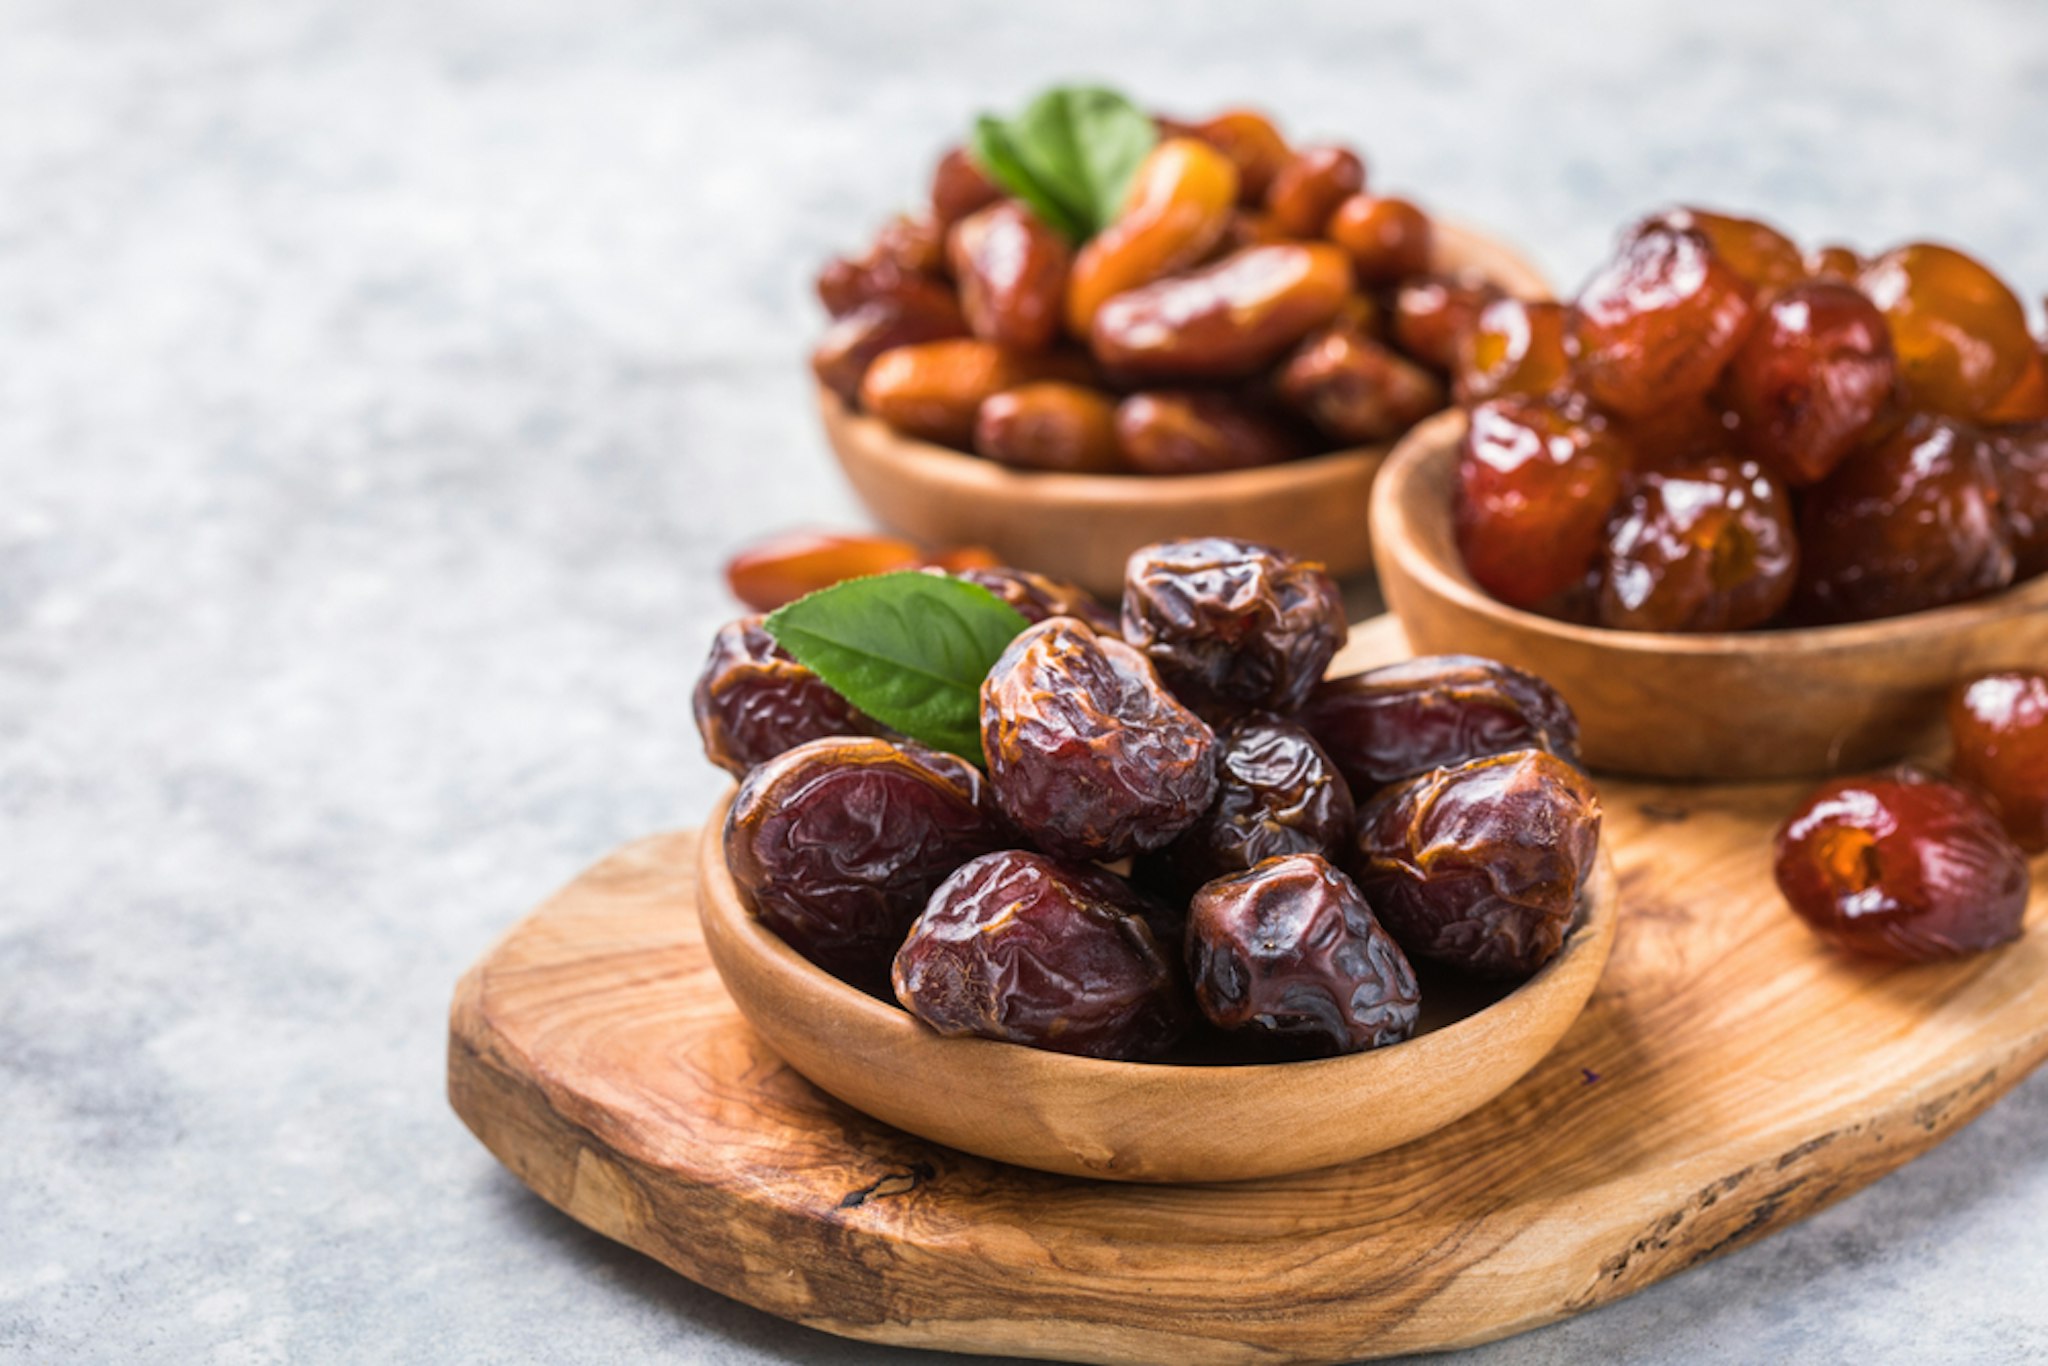 Dates in wooden bowls